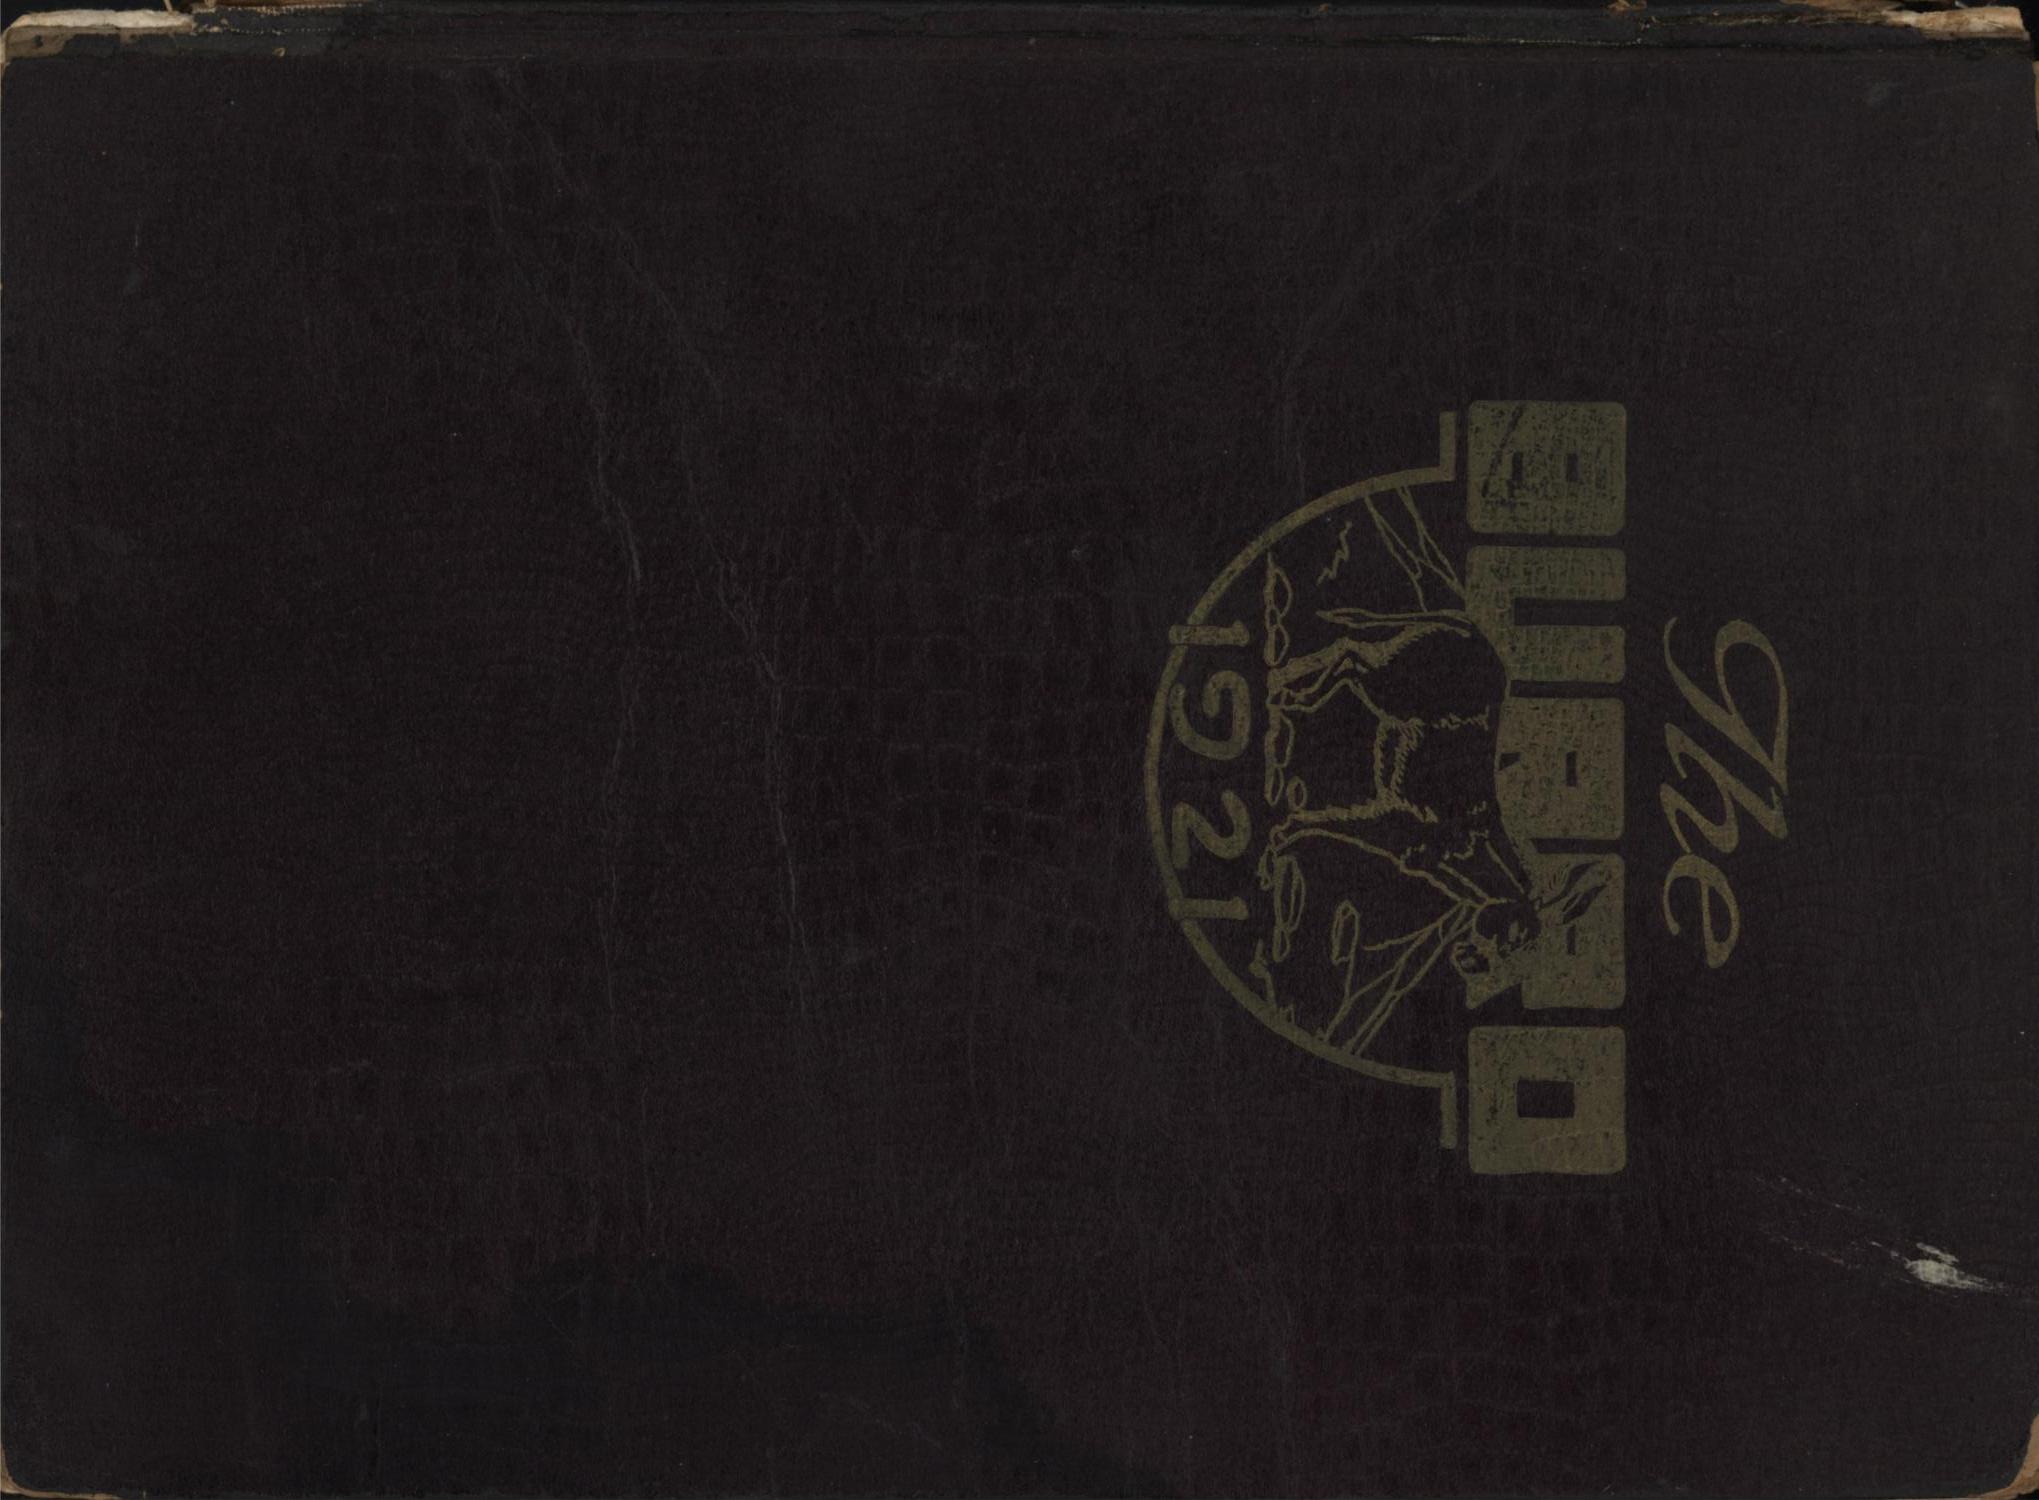 The Burro, Yearbook of Mineral Wells High School, 1921
                                                
                                                    Front Cover
                                                